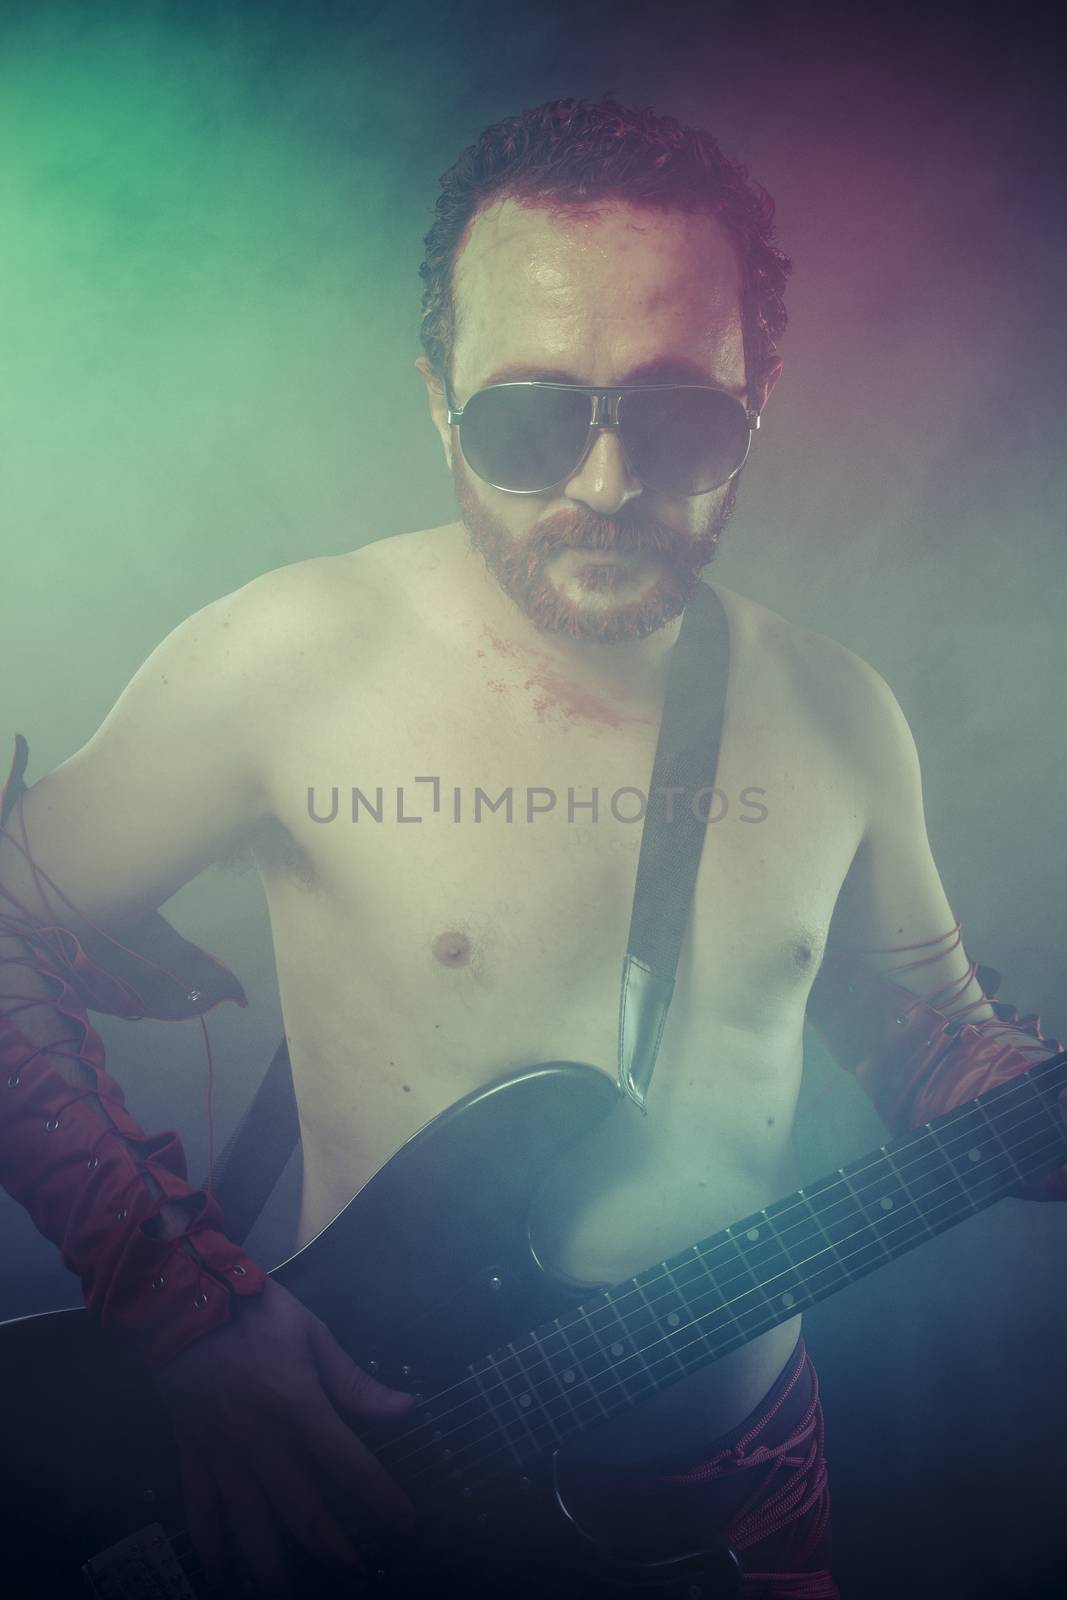 Music, rocker man with electric guitar in a rock concert by FernandoCortes